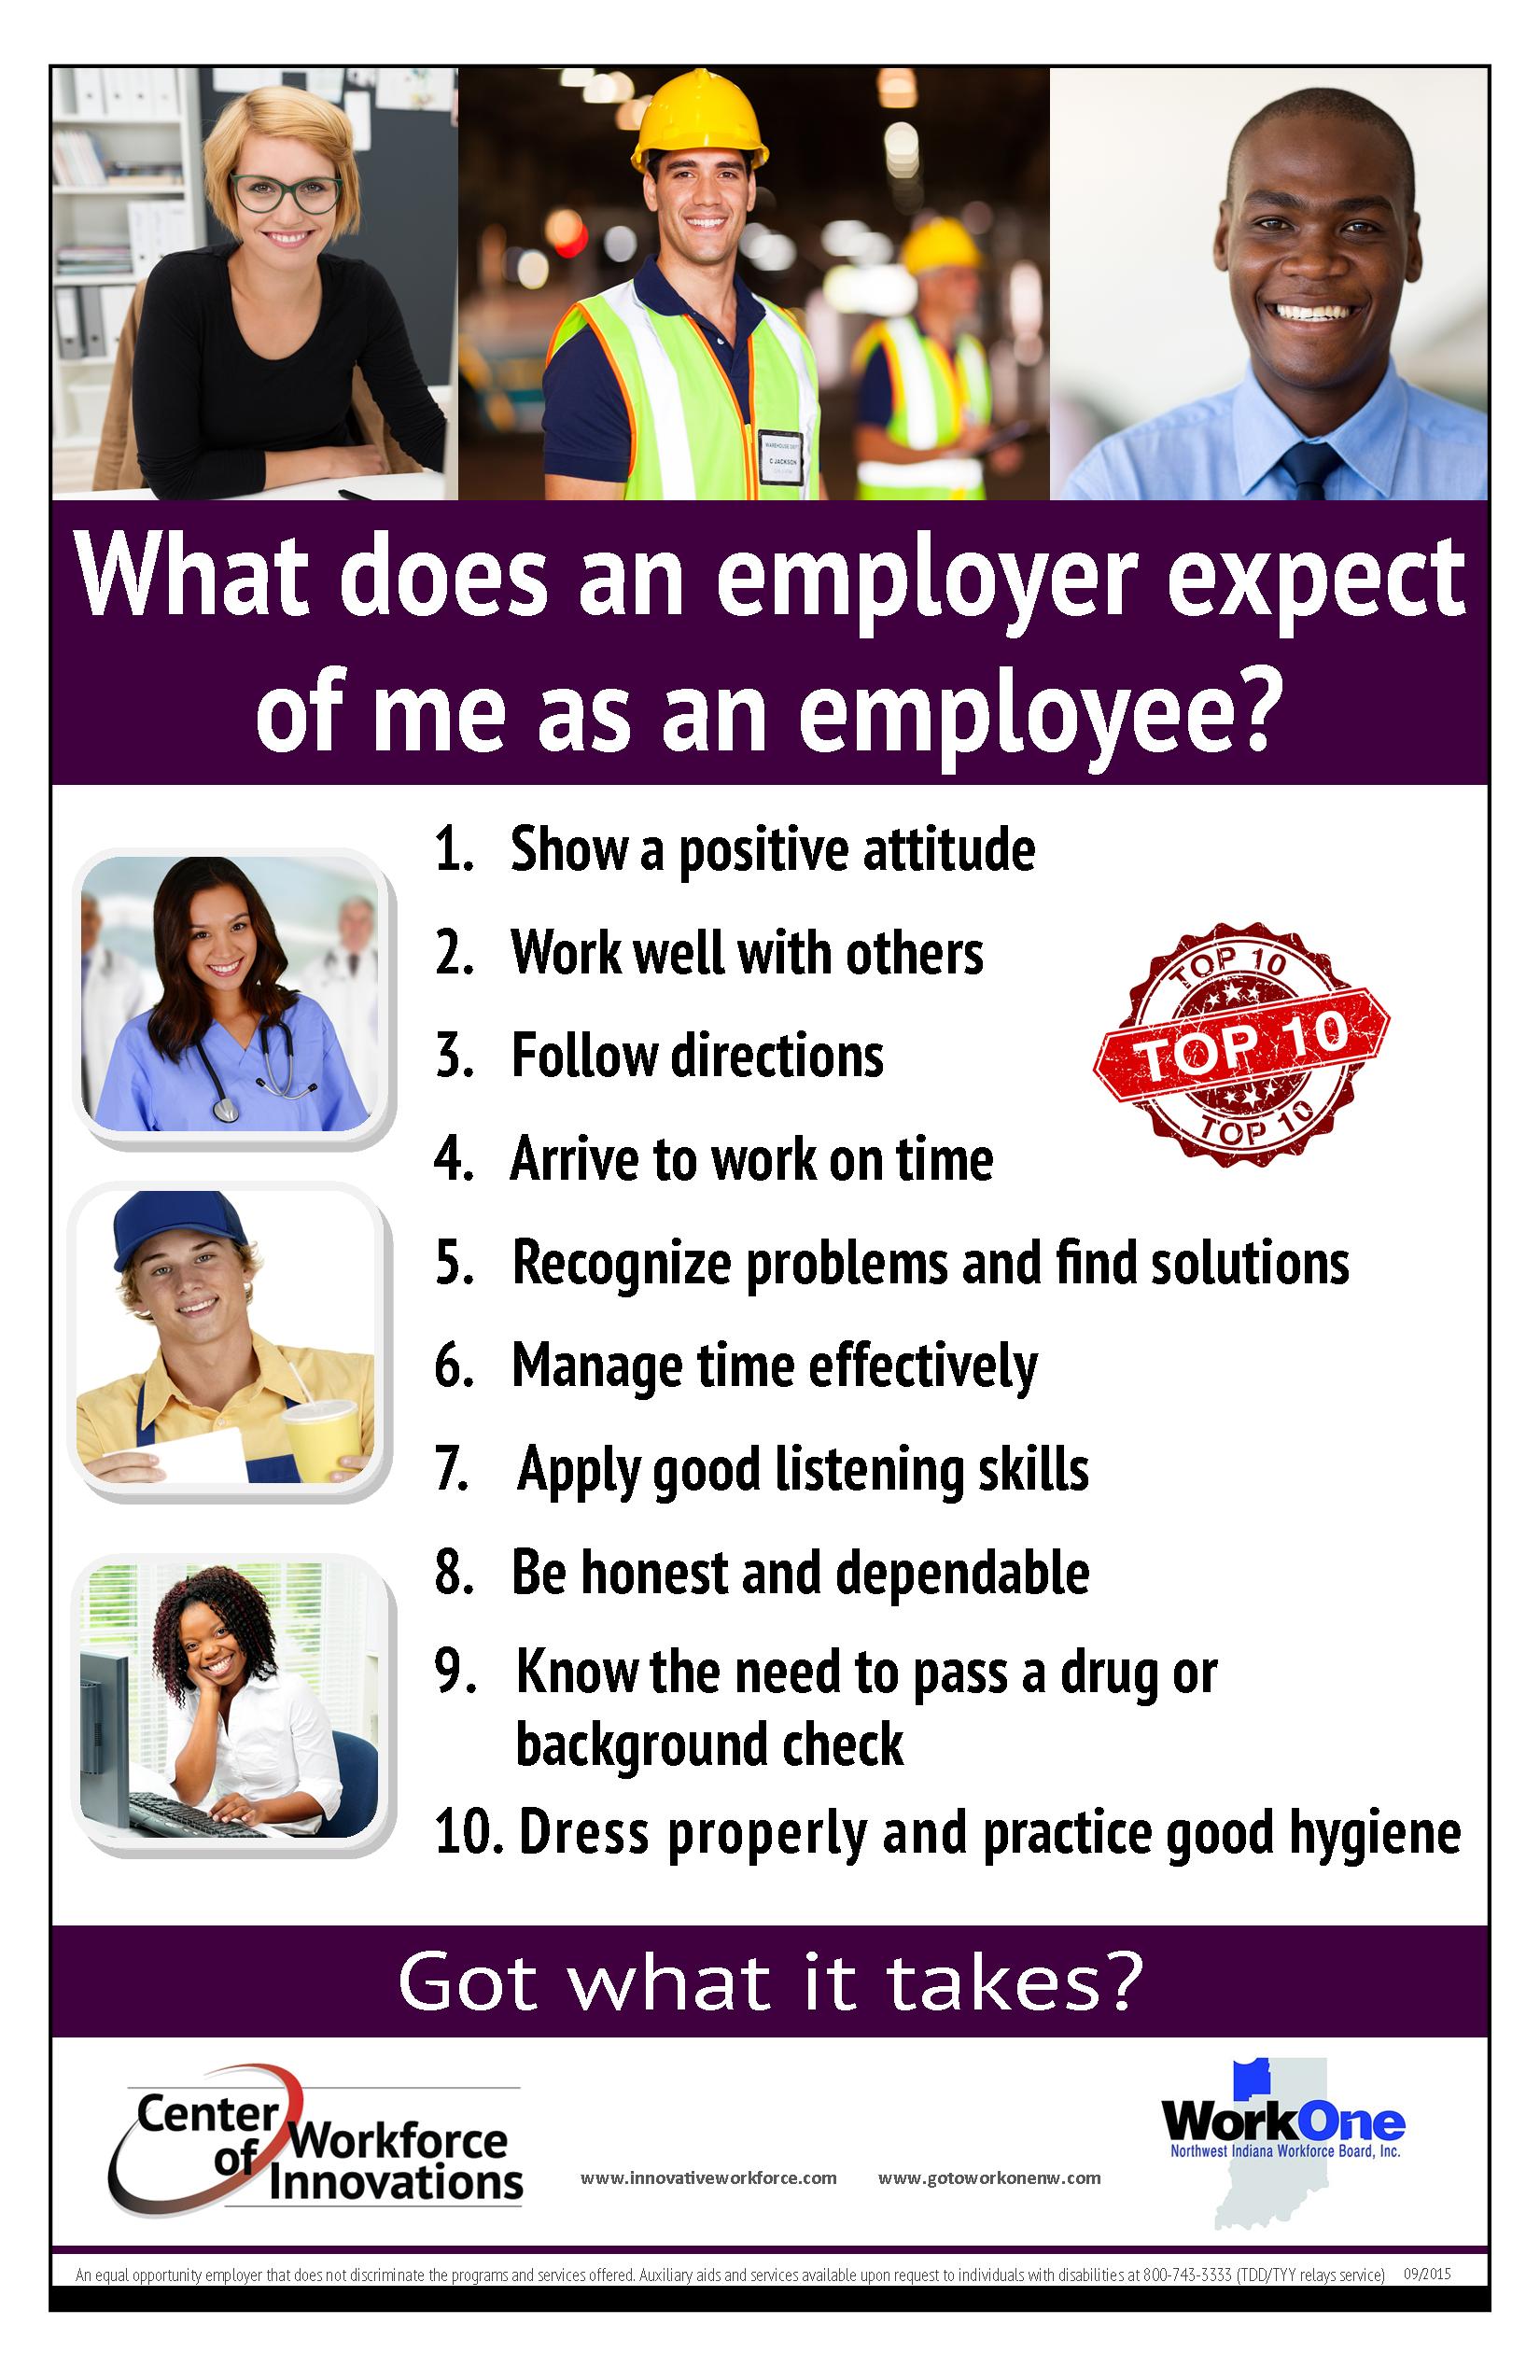 Employer expectations of students attending job fairs